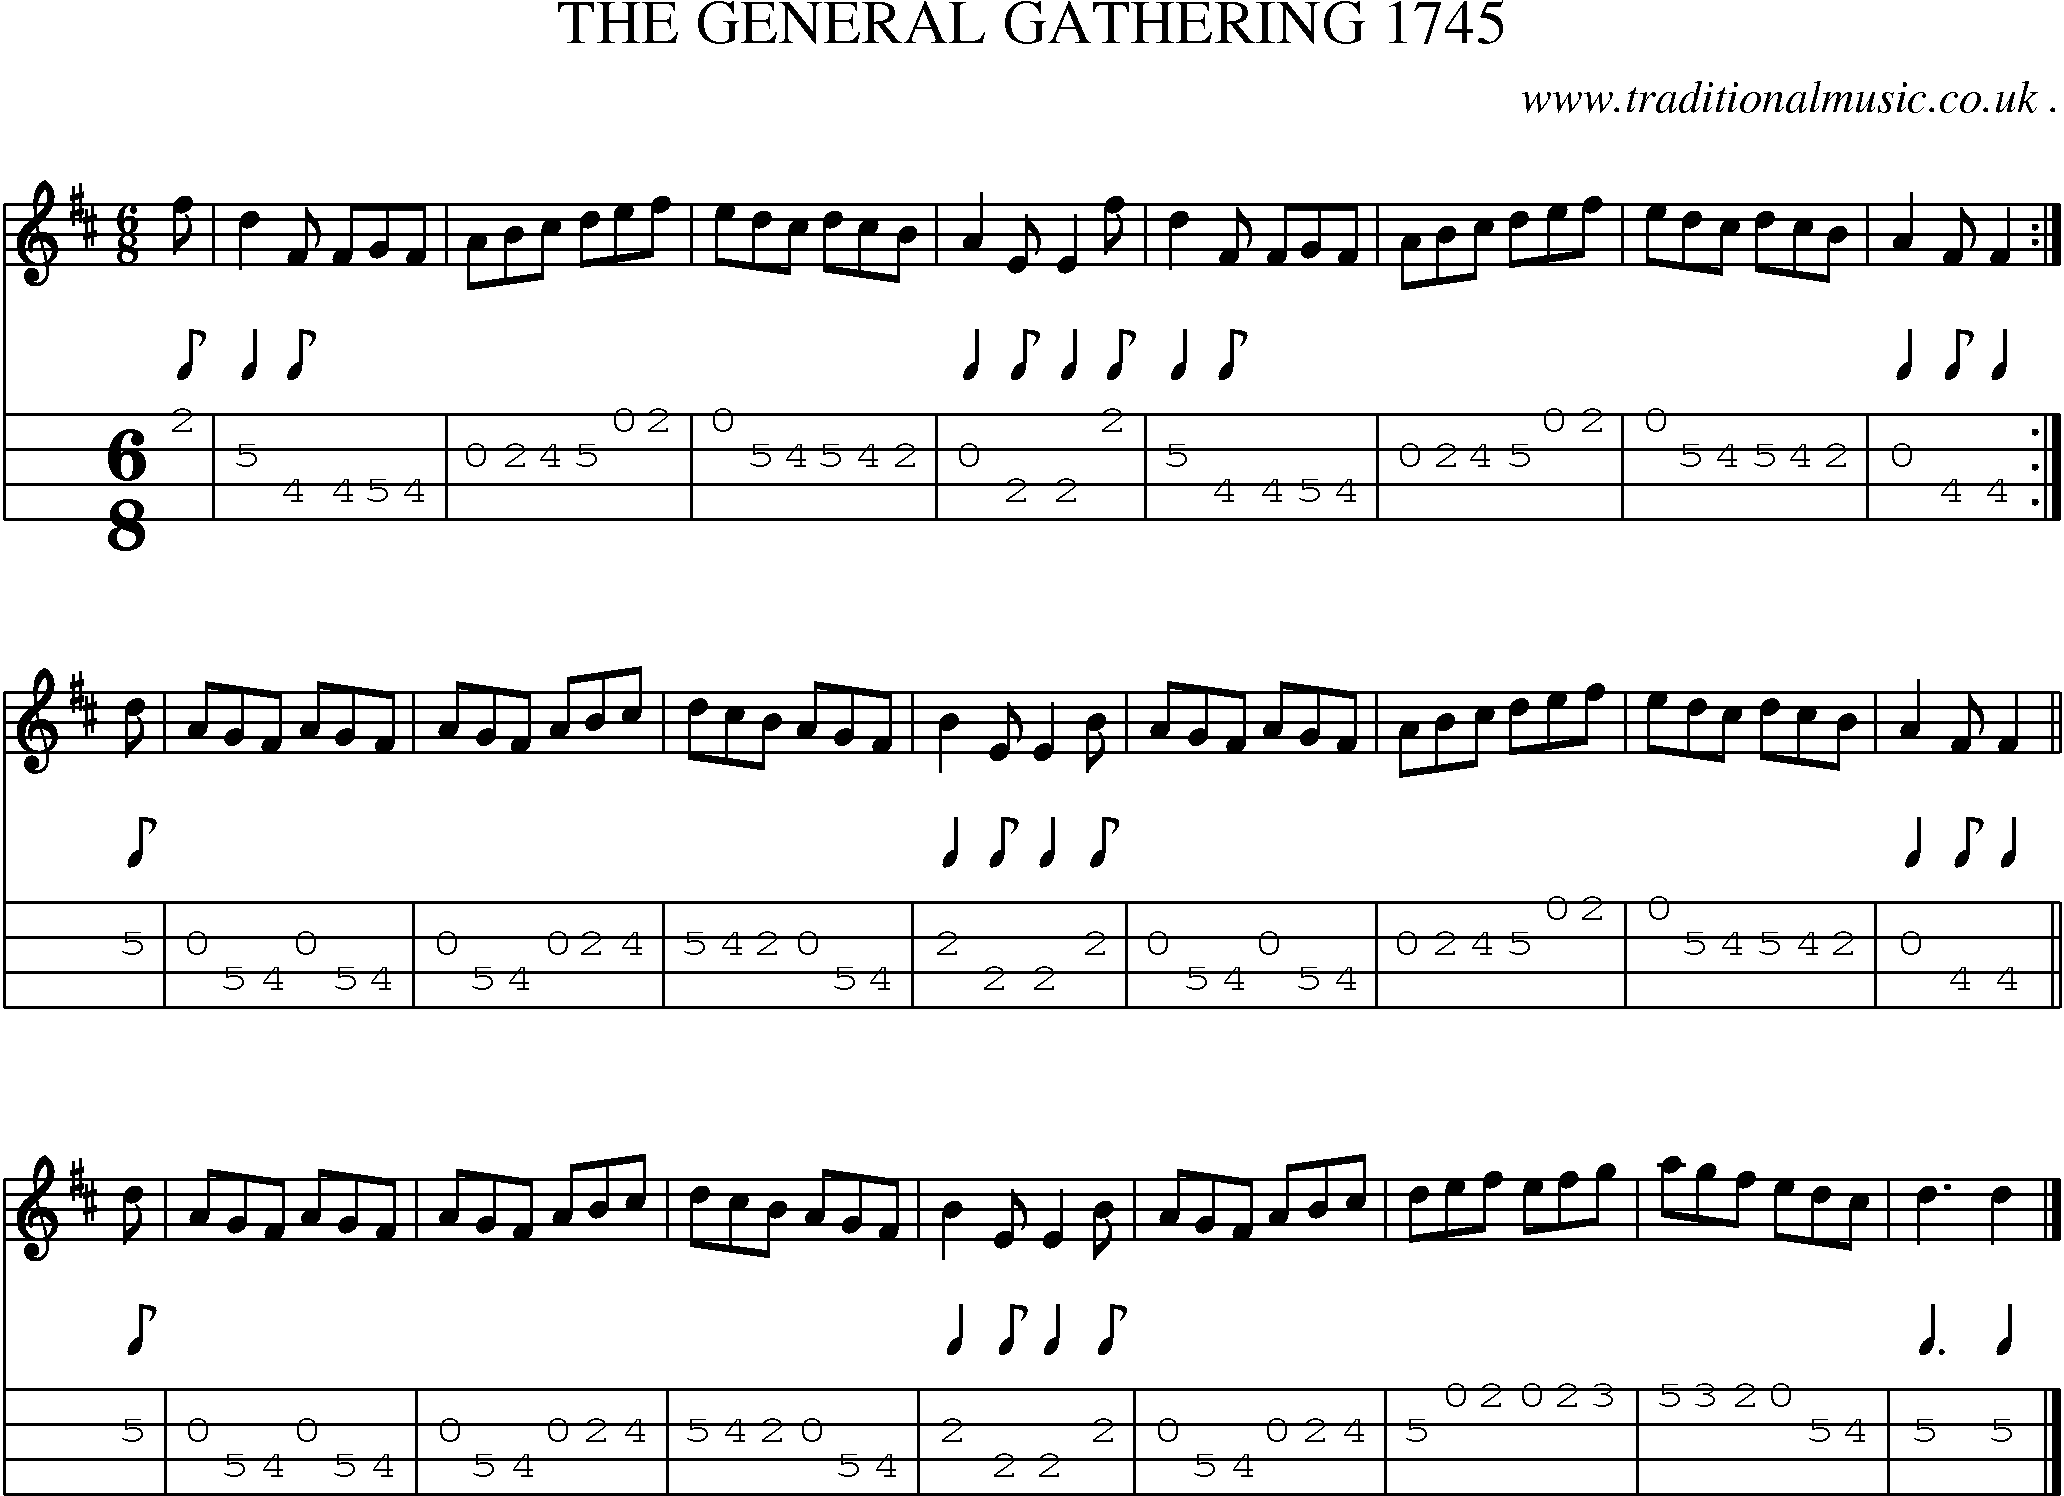 Sheet-music  score, Chords and Mandolin Tabs for The General Gathering 1745